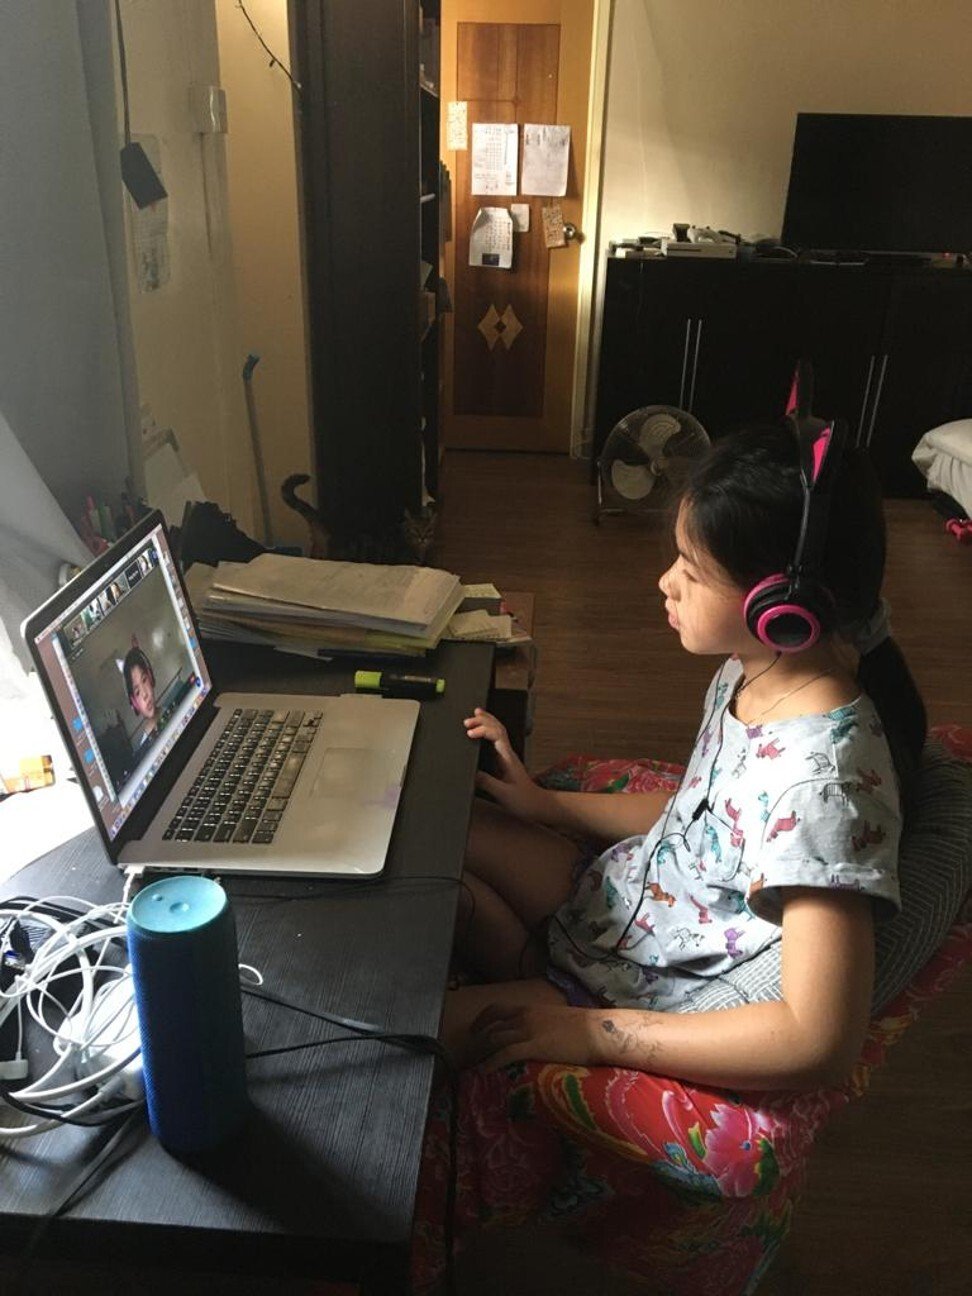 Despite her increased workload, Wong is also a mother who helps her own children learn through remote classes, including nine-year-old Matea.